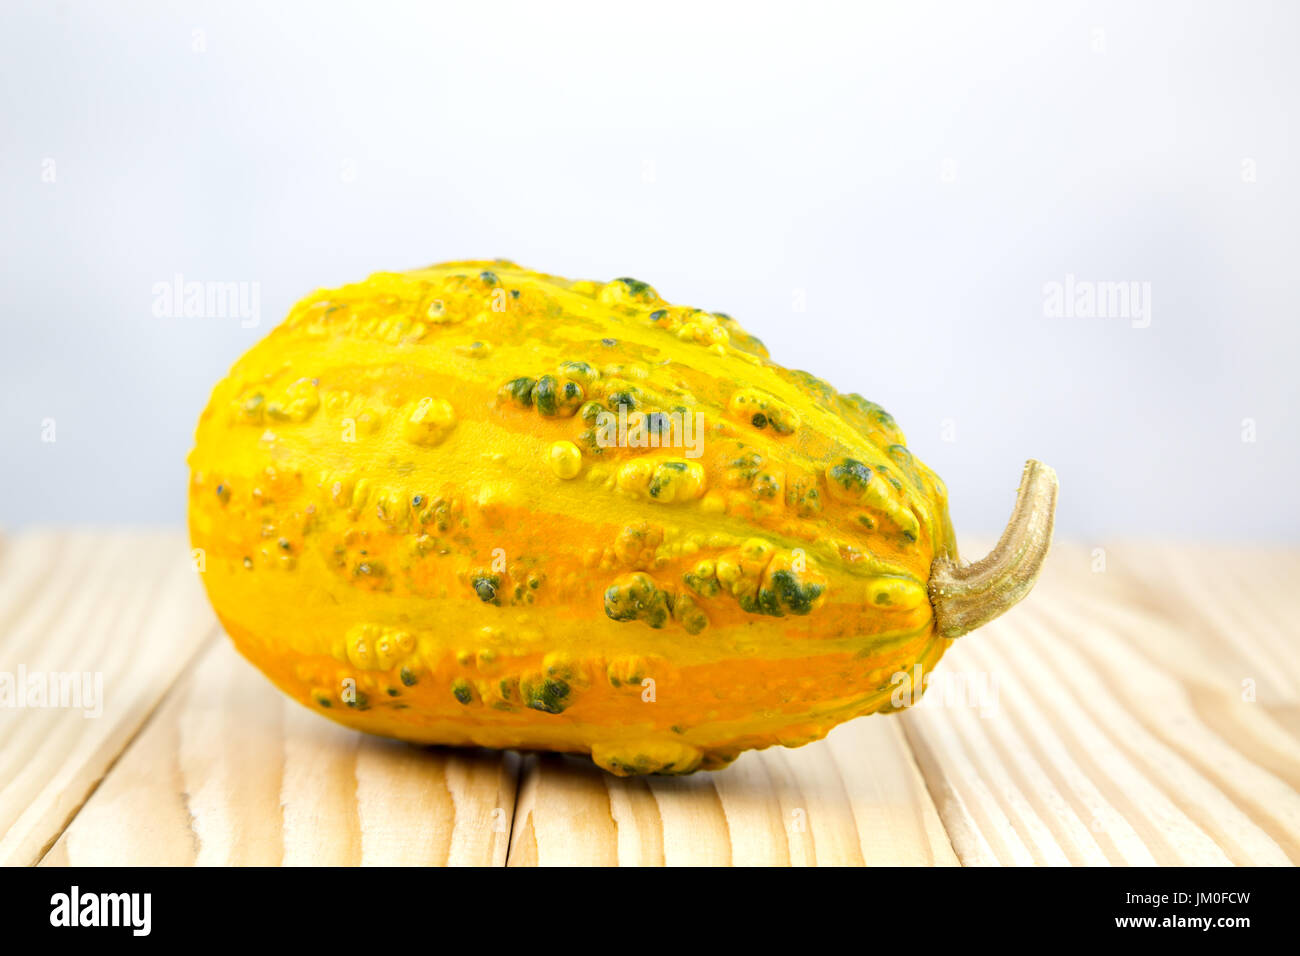 A single pumpkin (Delicata Squash) lies in front of a white background as a Cut-Outs Stock Photo